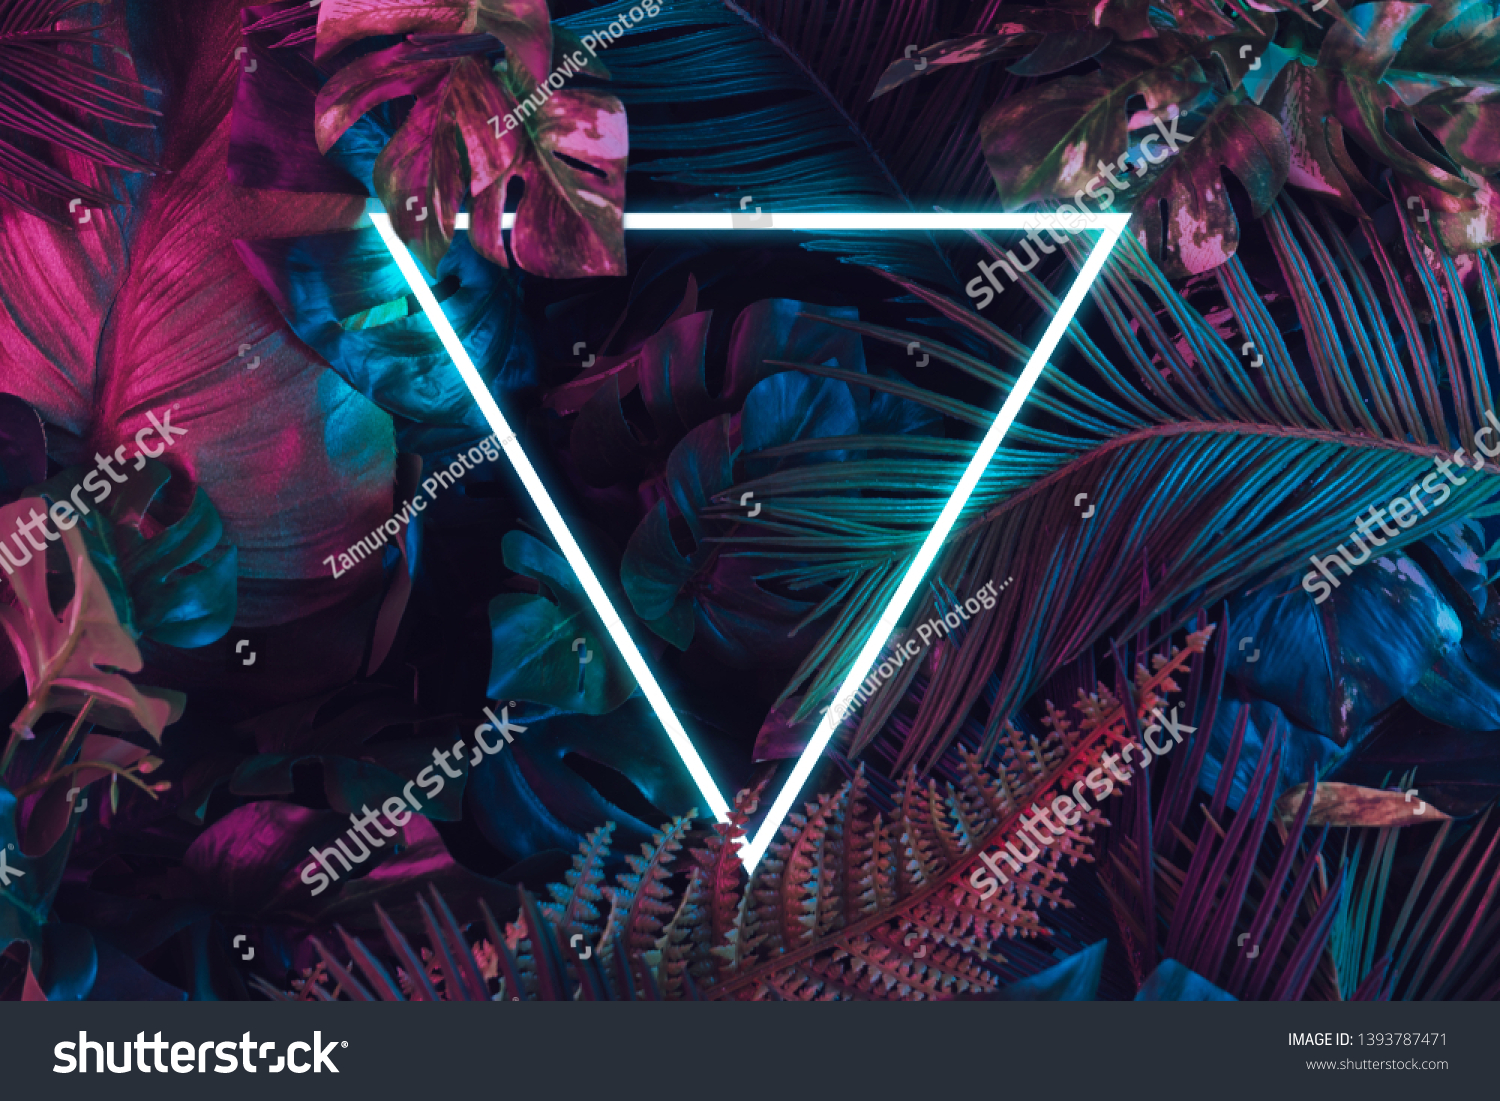 Creative fluorescent color layout made of tropical leaves. Flat lay neon colors. Nature concept. #1393787471